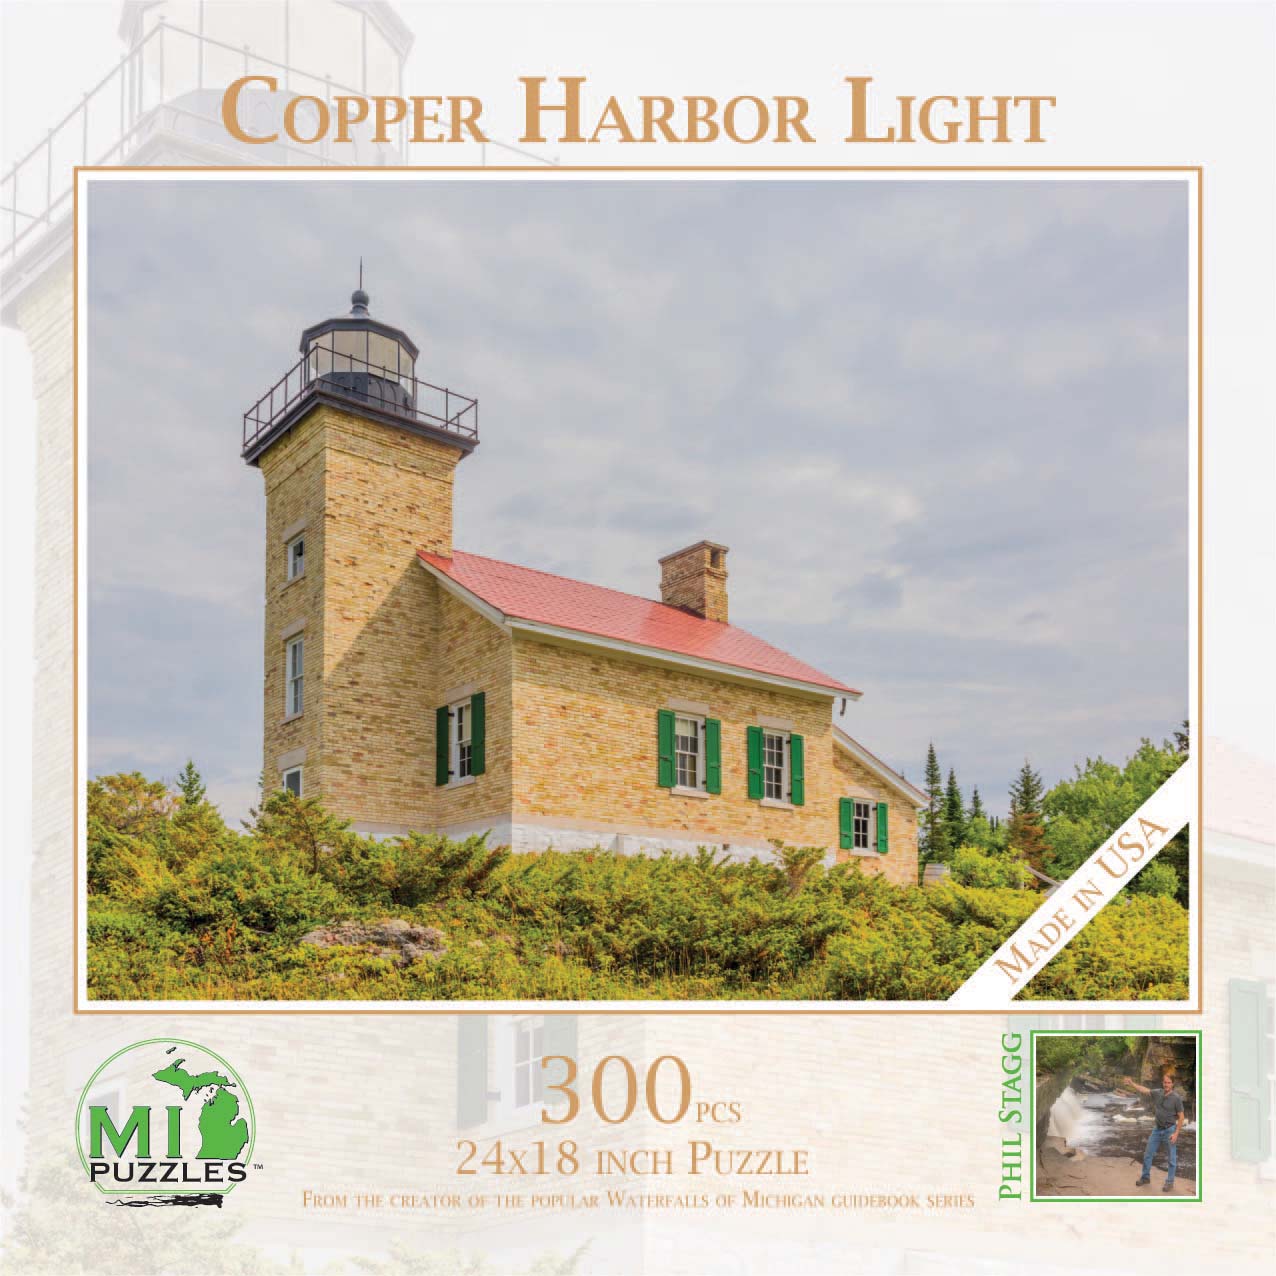 Copper Harbor Light Lighthouse Jigsaw Puzzle